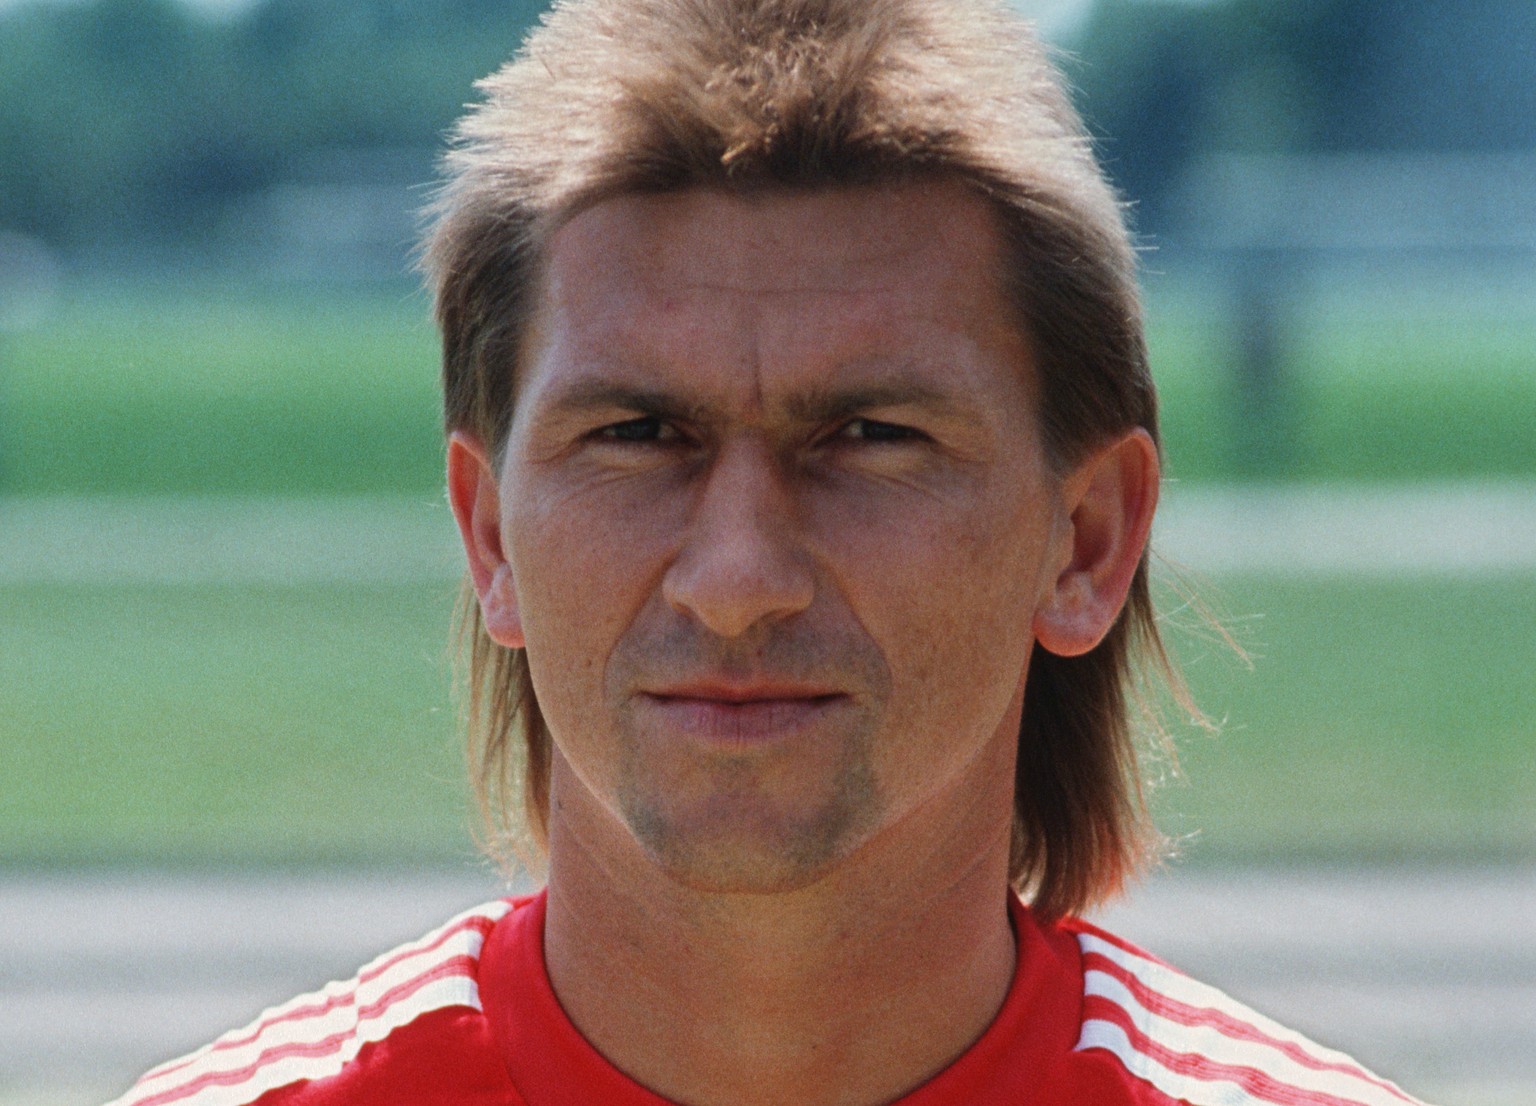 MUNICH, GERMANY - JULY 01: Klaus Augenthaler of Munich poses during the photo call and team presentation of FC Bayern Munich on July 01, 1988 in Munich, Germany. (Photo by Bongarts/Getty Images)